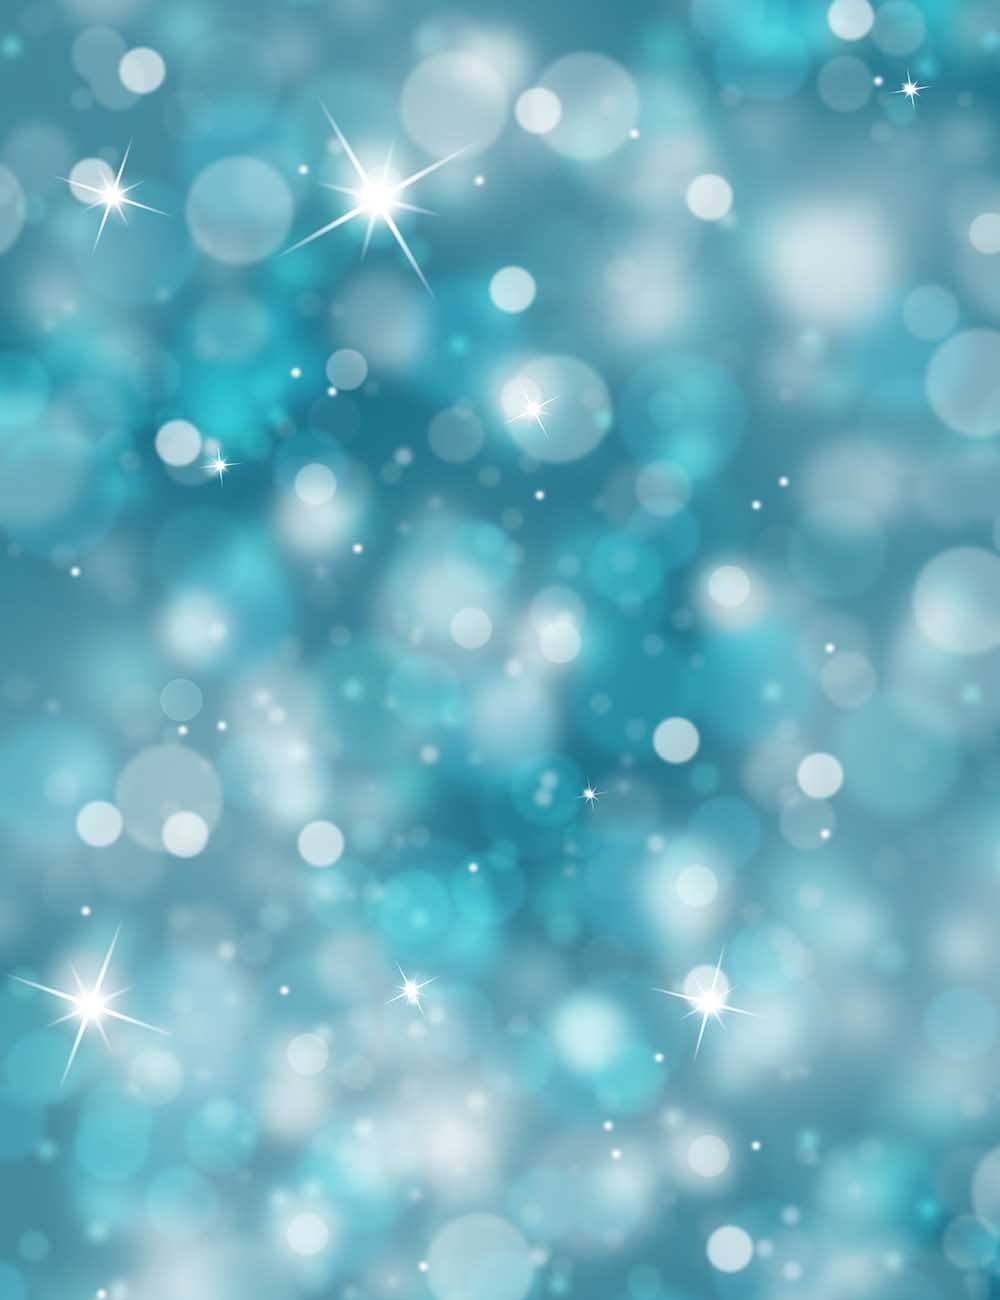 Winter Light Background With Sparkle Backdrop For Holiday Photography Q-0137 Shopbackdrop